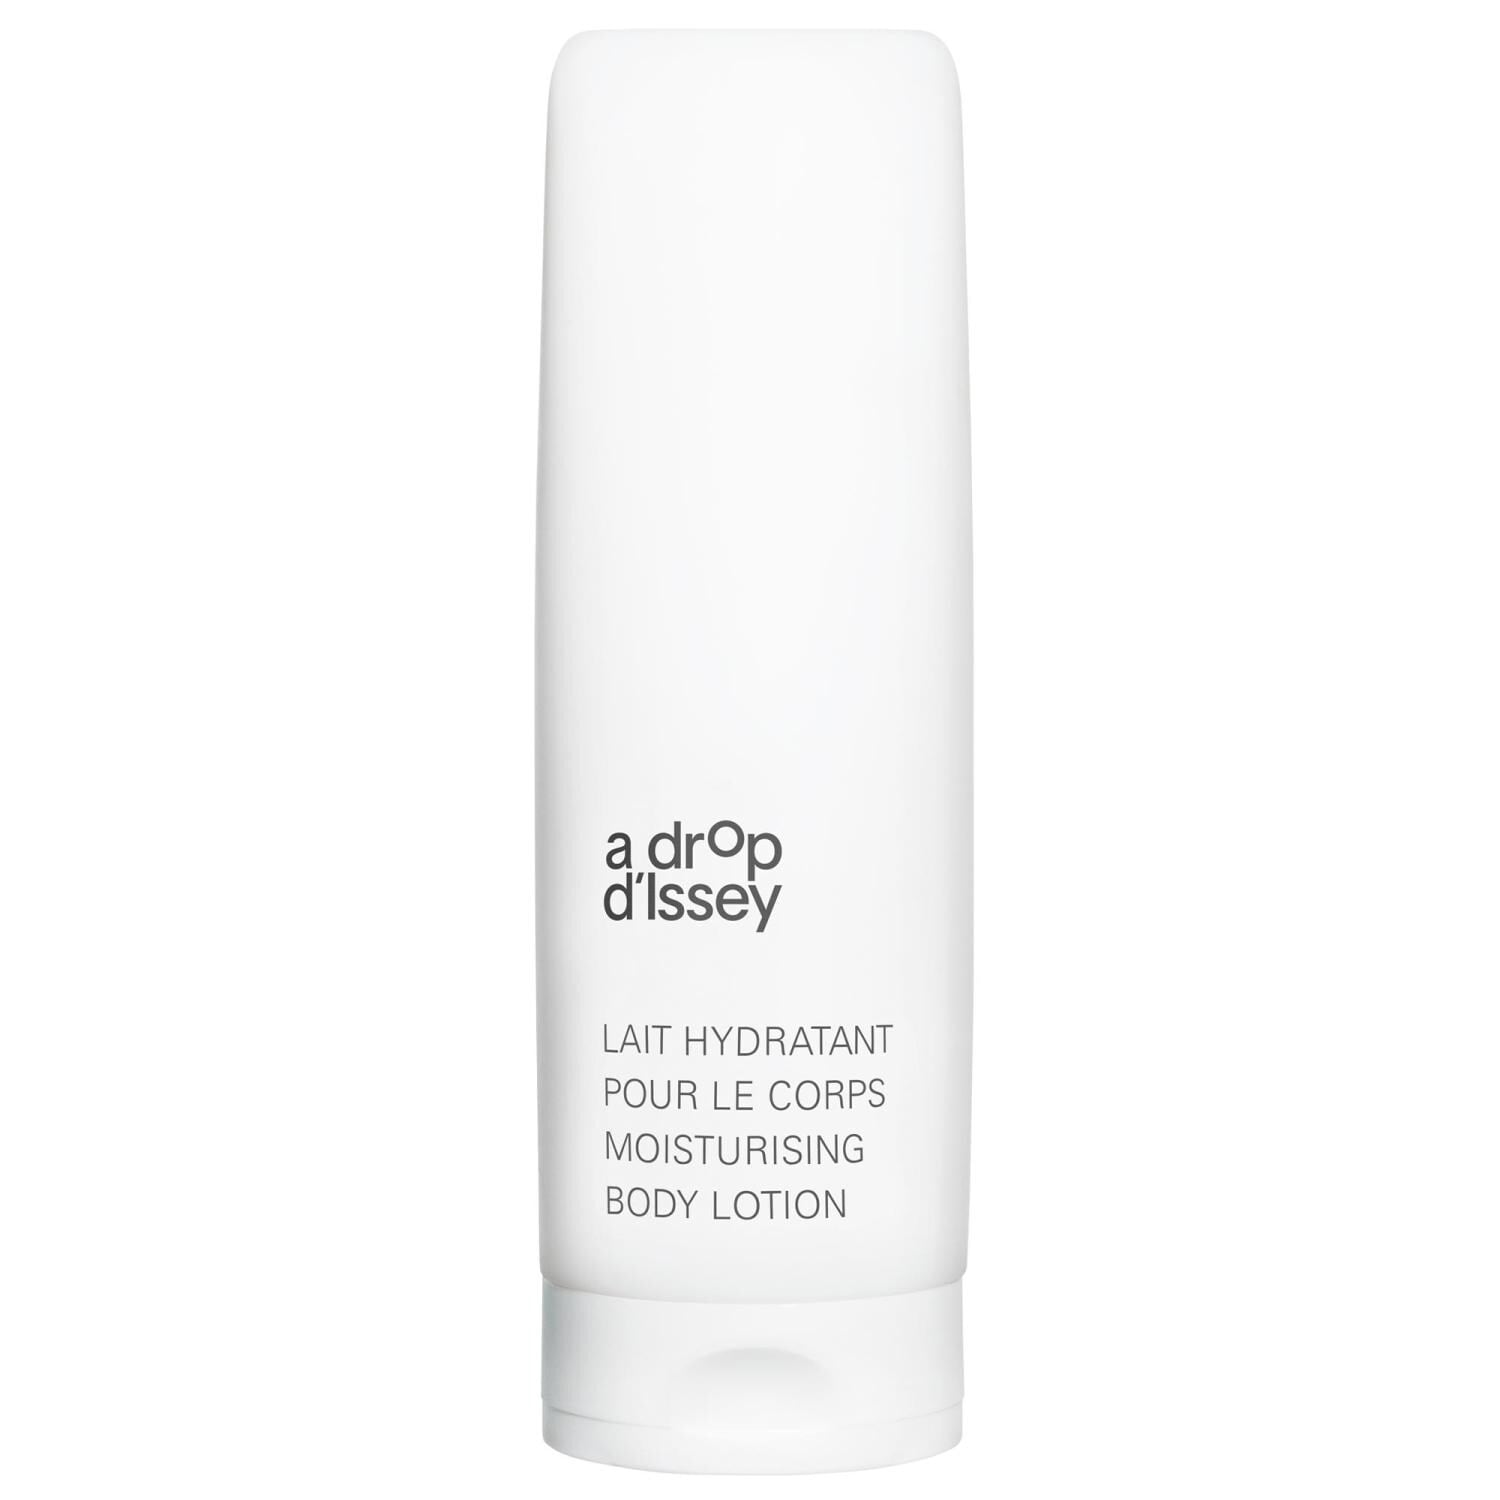 Issey Miyake A drop dissey body lotion